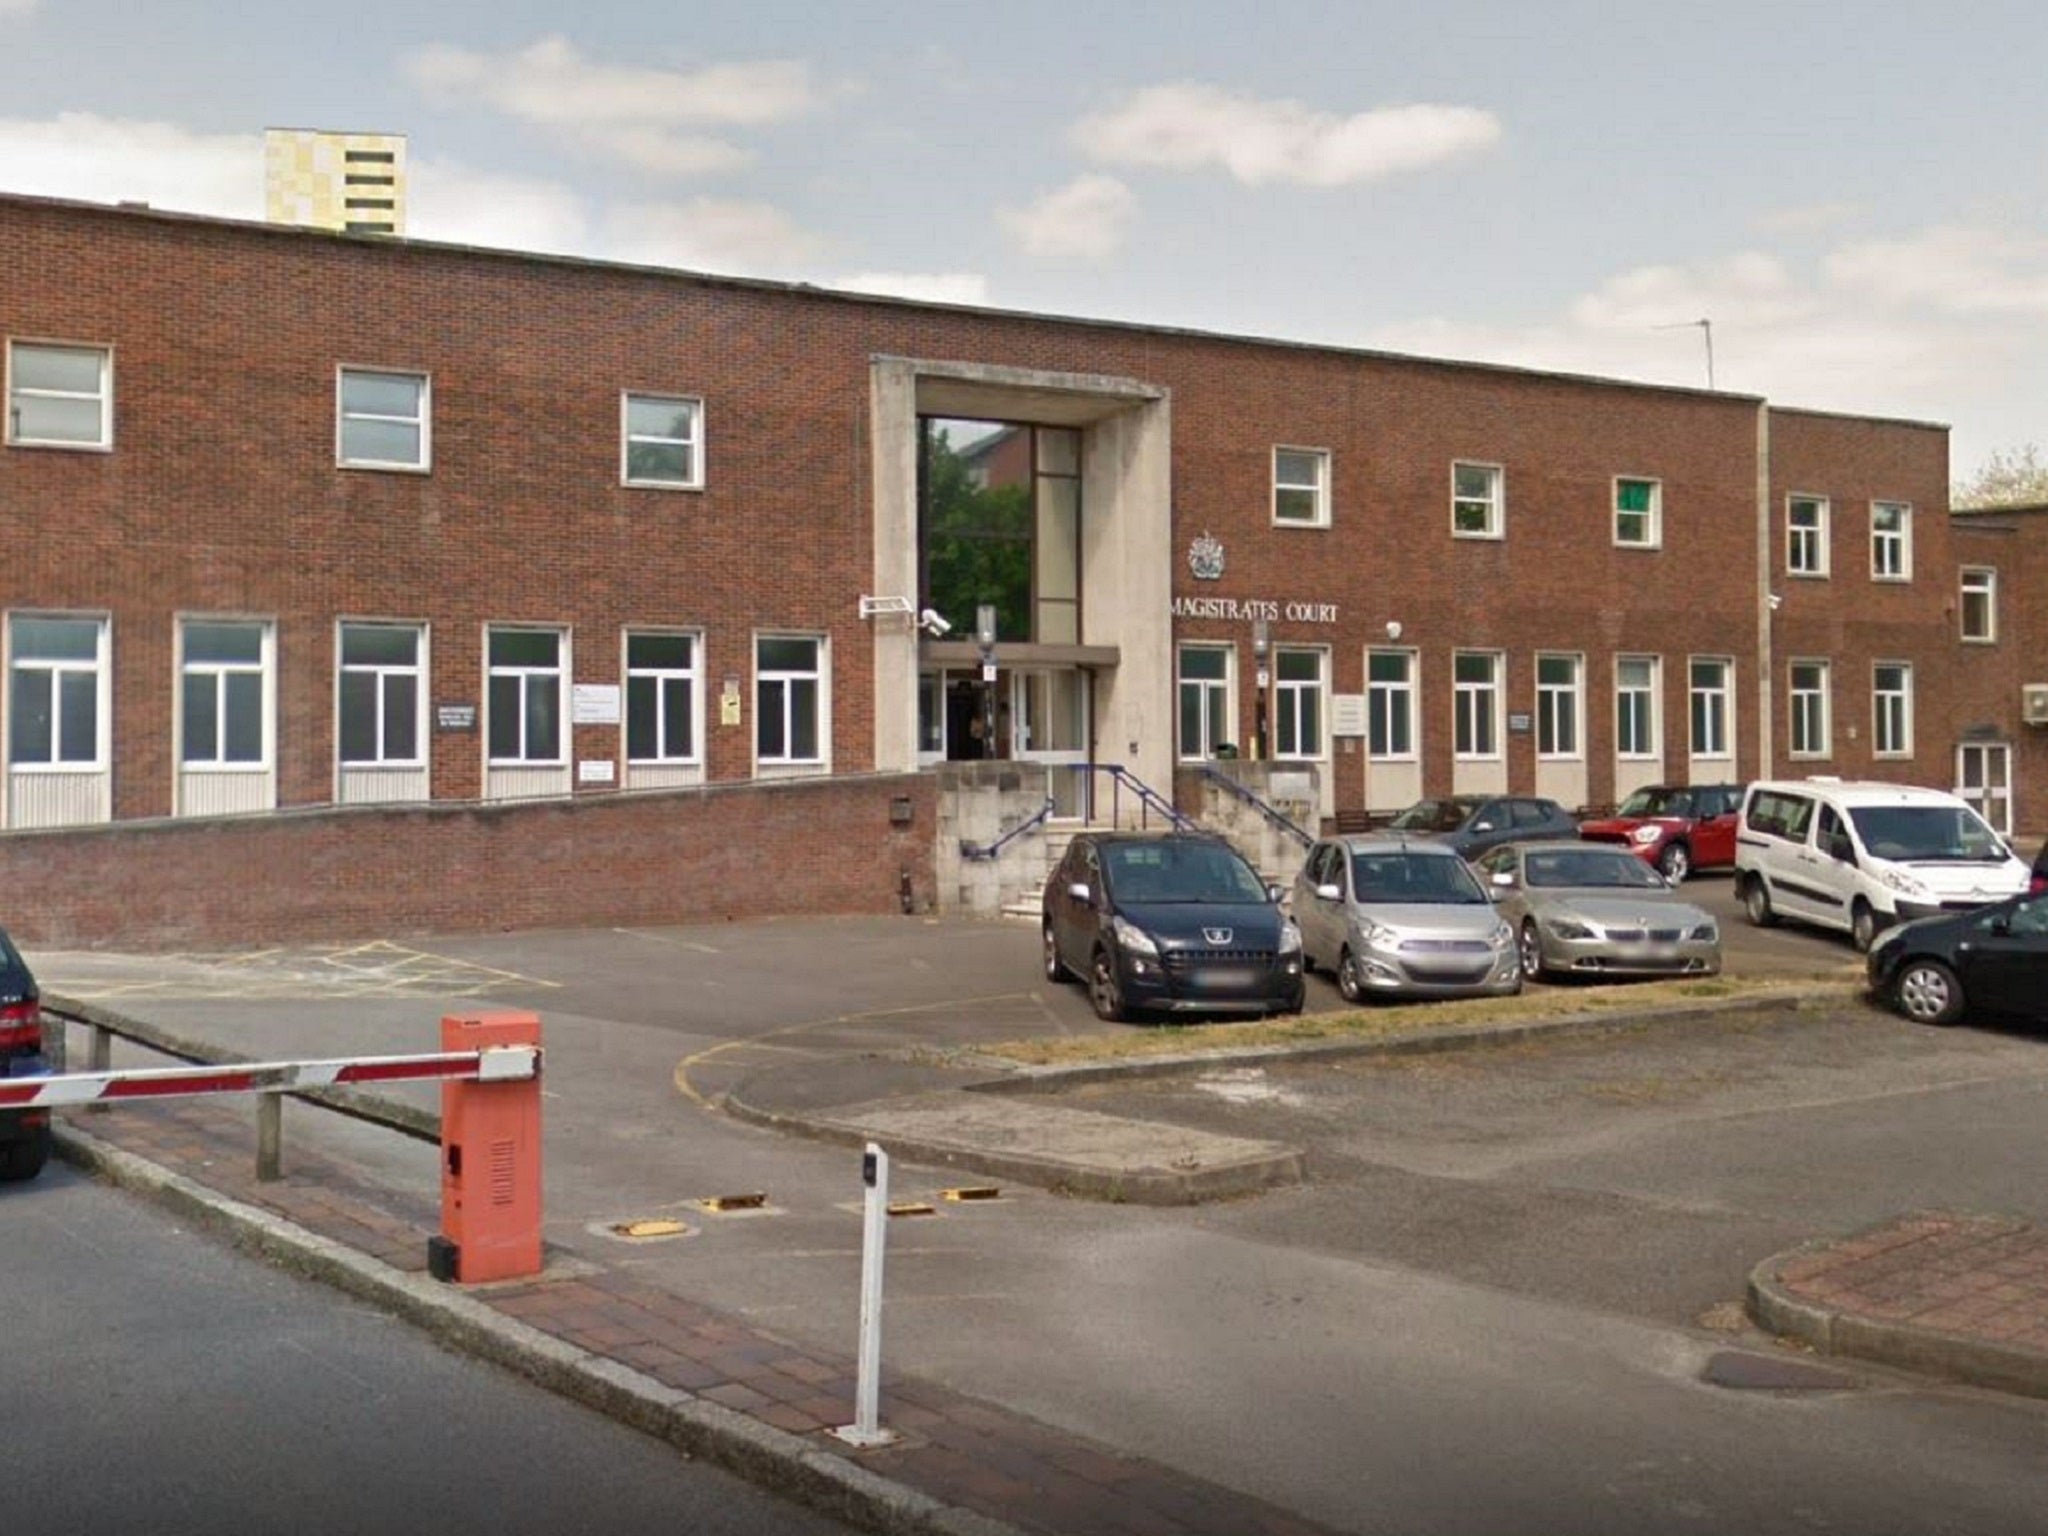 The case was due to be heard at Portsmouth Magistrates’ Court but was withdrawn